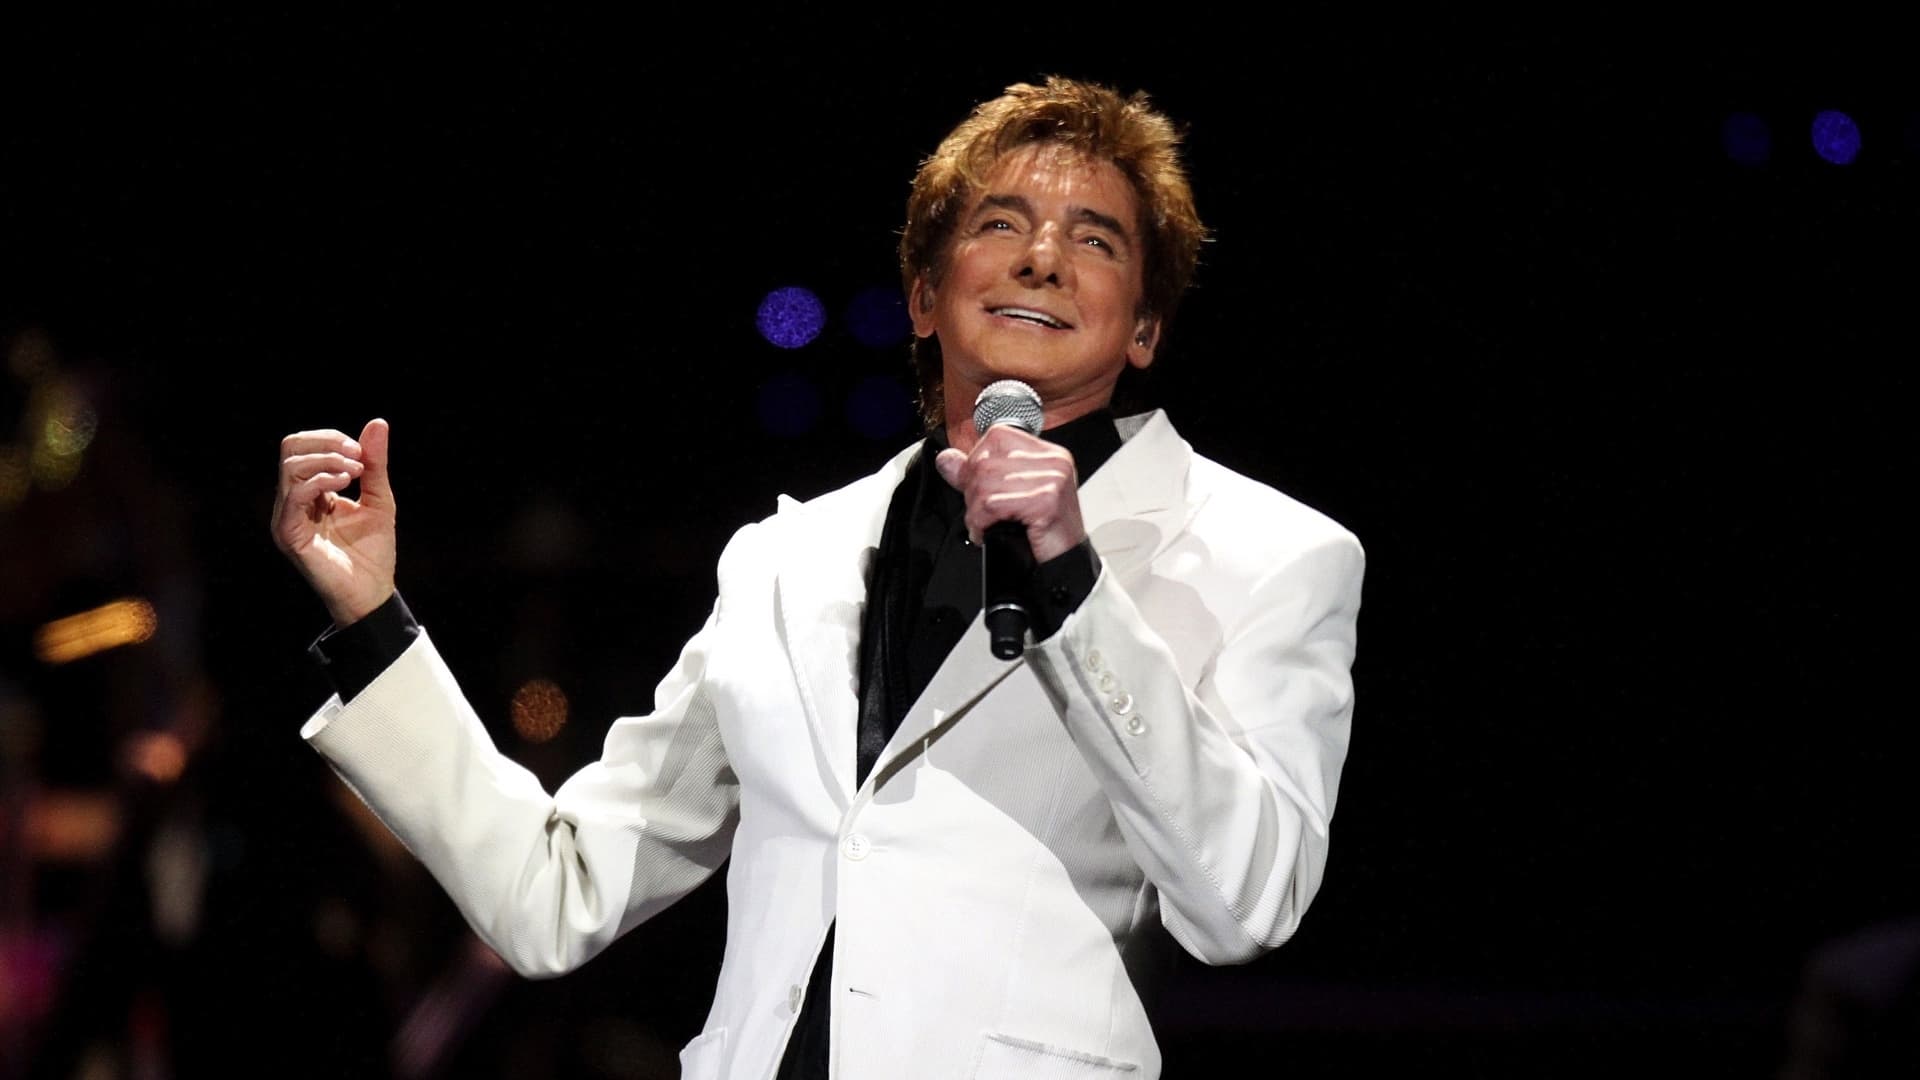 Manilow: Music and Passion (2006)